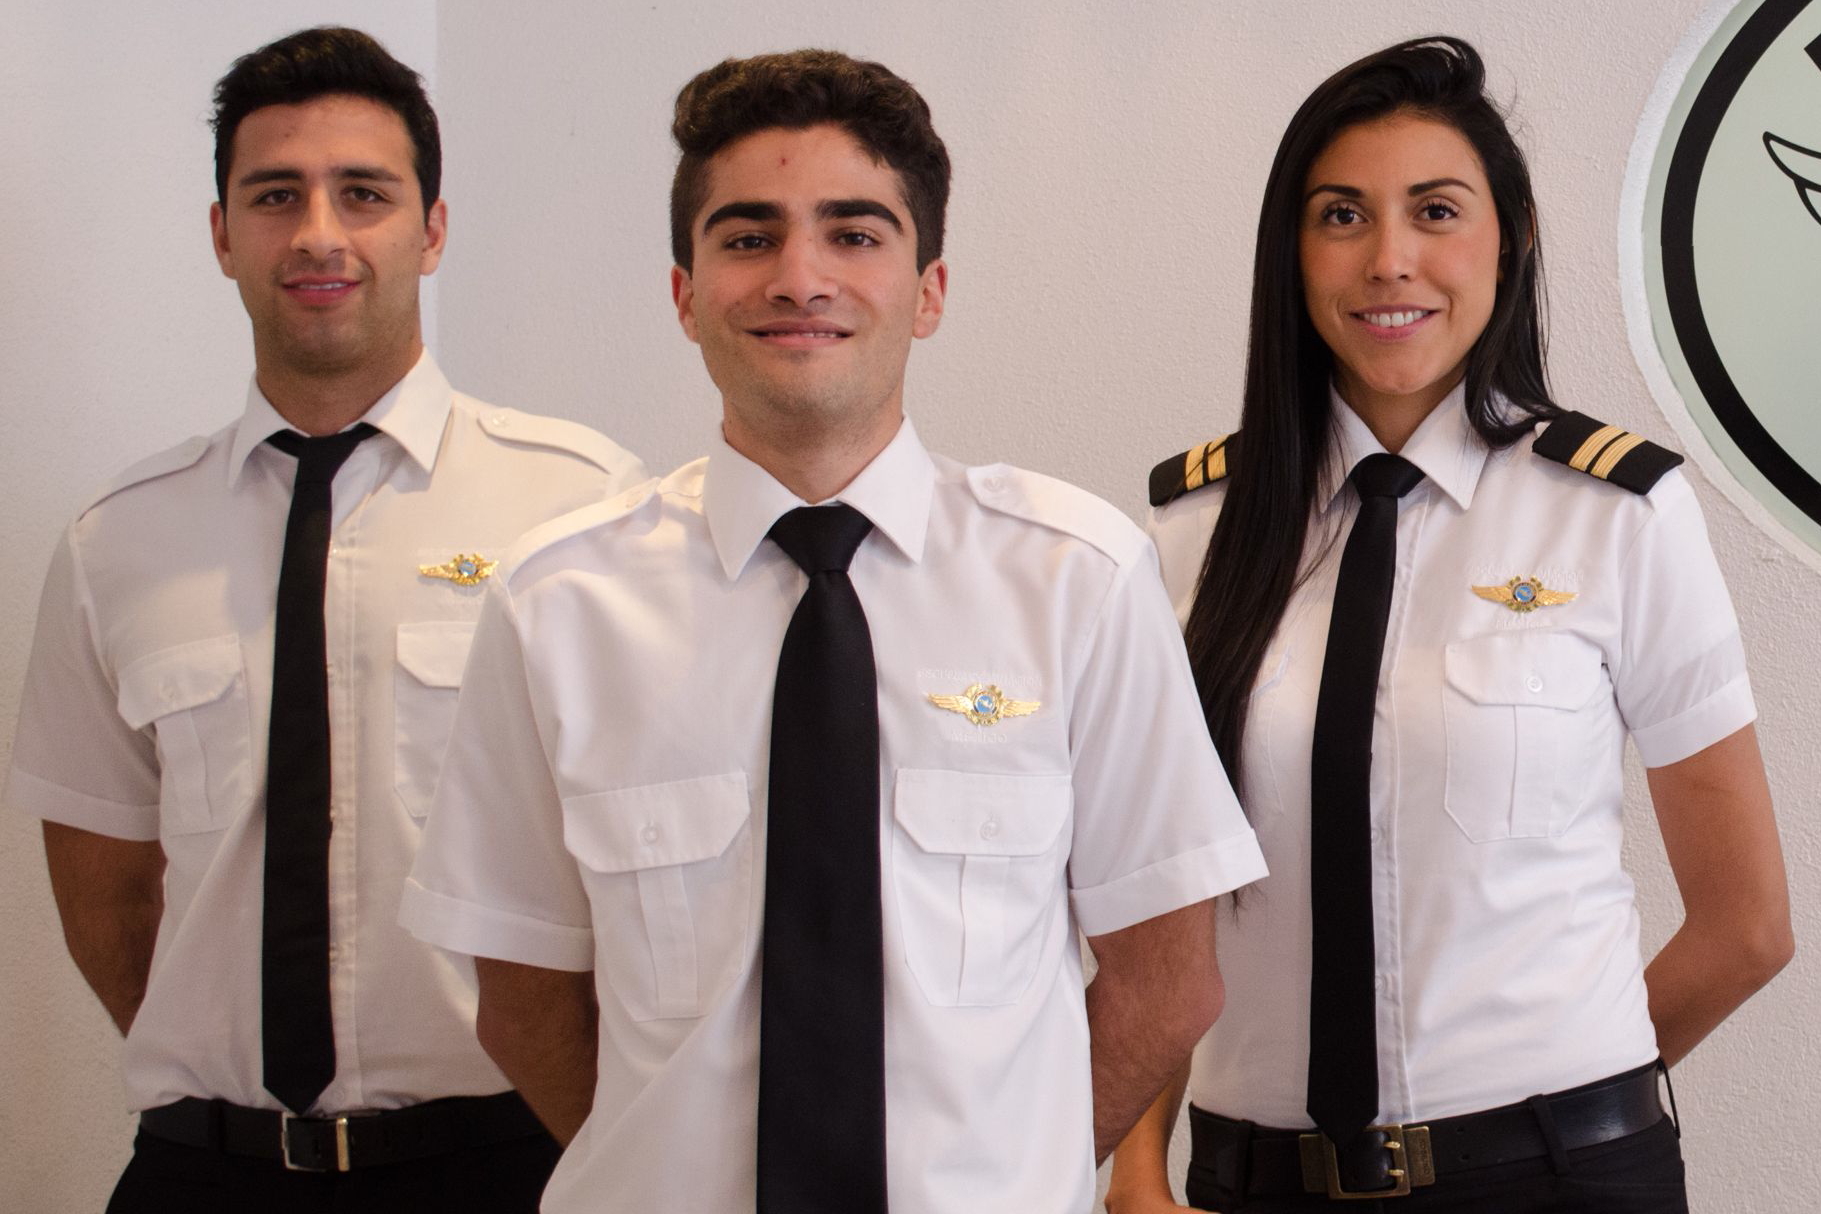 After completing their initial training with Escuela de Aviacion Mexico (EAM), cadets will qualify at the Airbus Mexico Training centre to become Airbus A320 pilots. Click to enlarge.